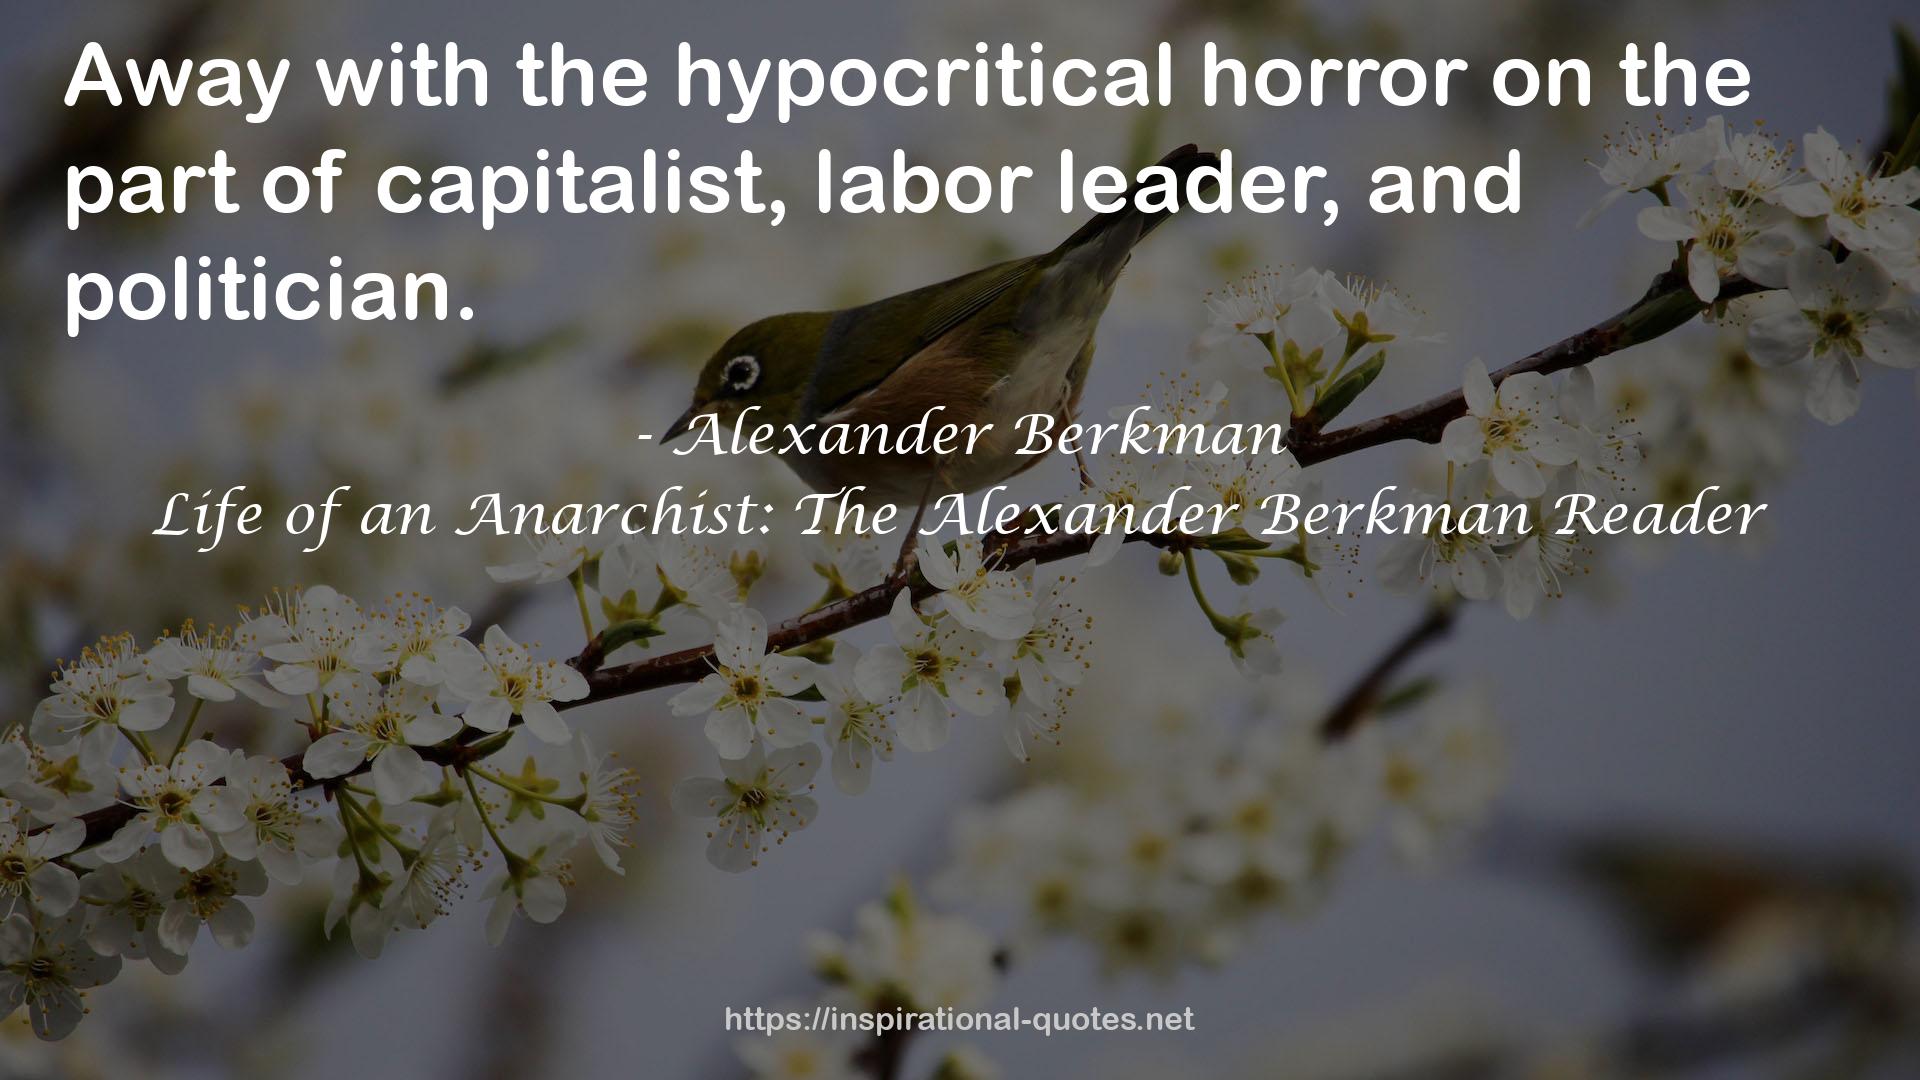 Life of an Anarchist: The Alexander Berkman Reader QUOTES